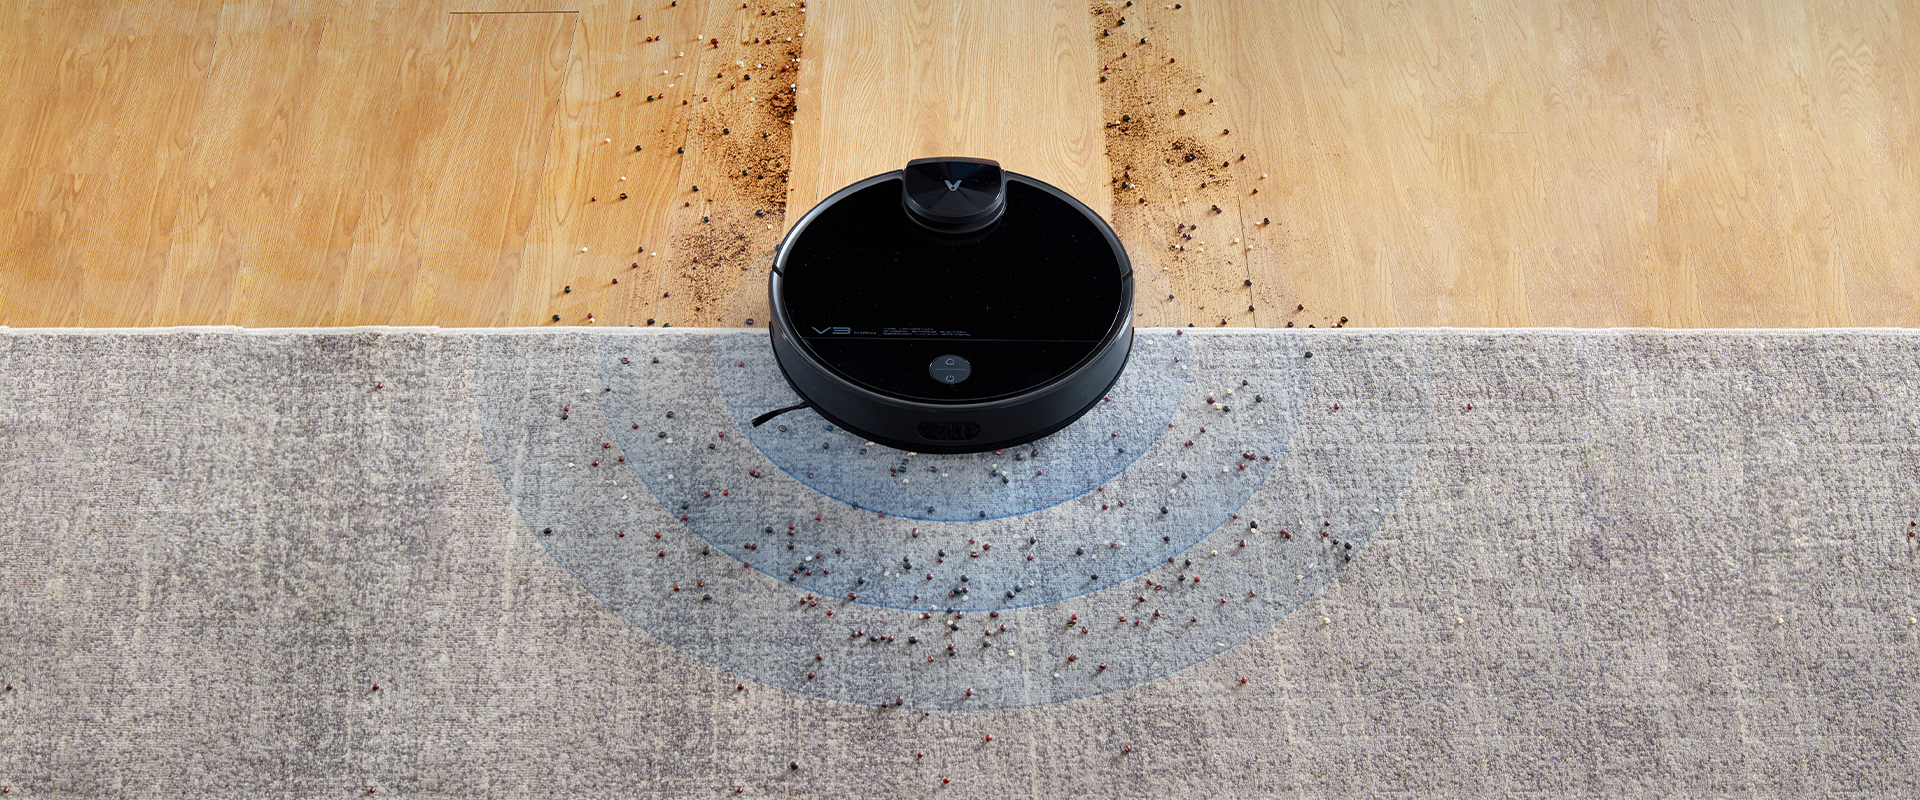 Viomi V3 Max Robot vacuum-mop for Carpet Cleaning